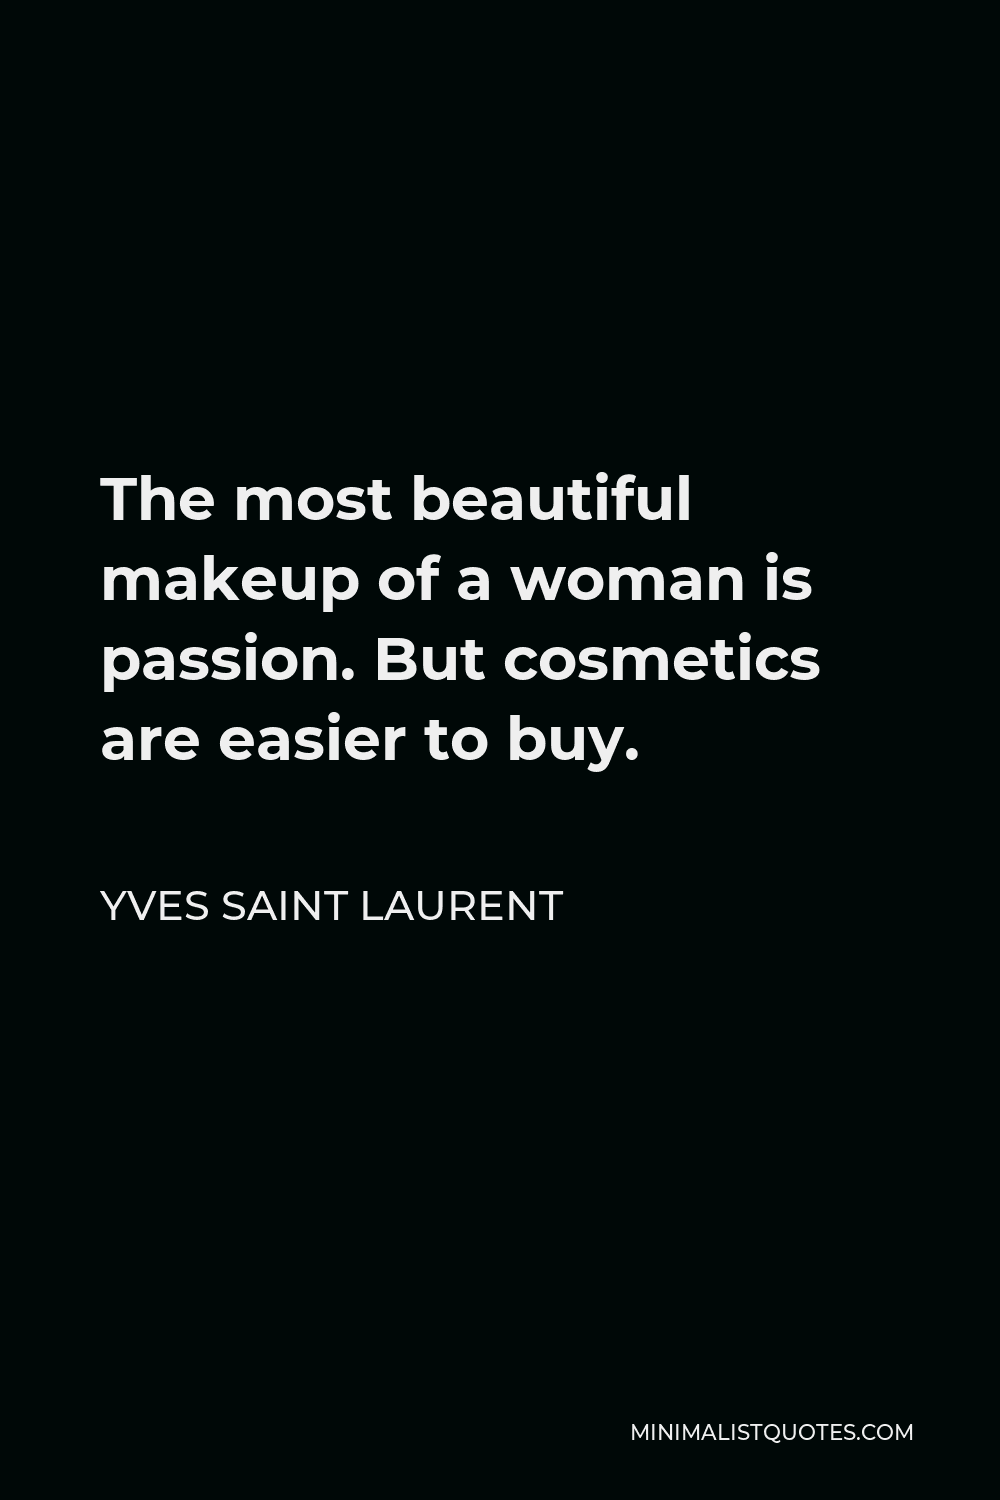 Yves Saint Laurent Quote - The most beautiful makeup of a woman is passion. But cosmetics are easier to buy.